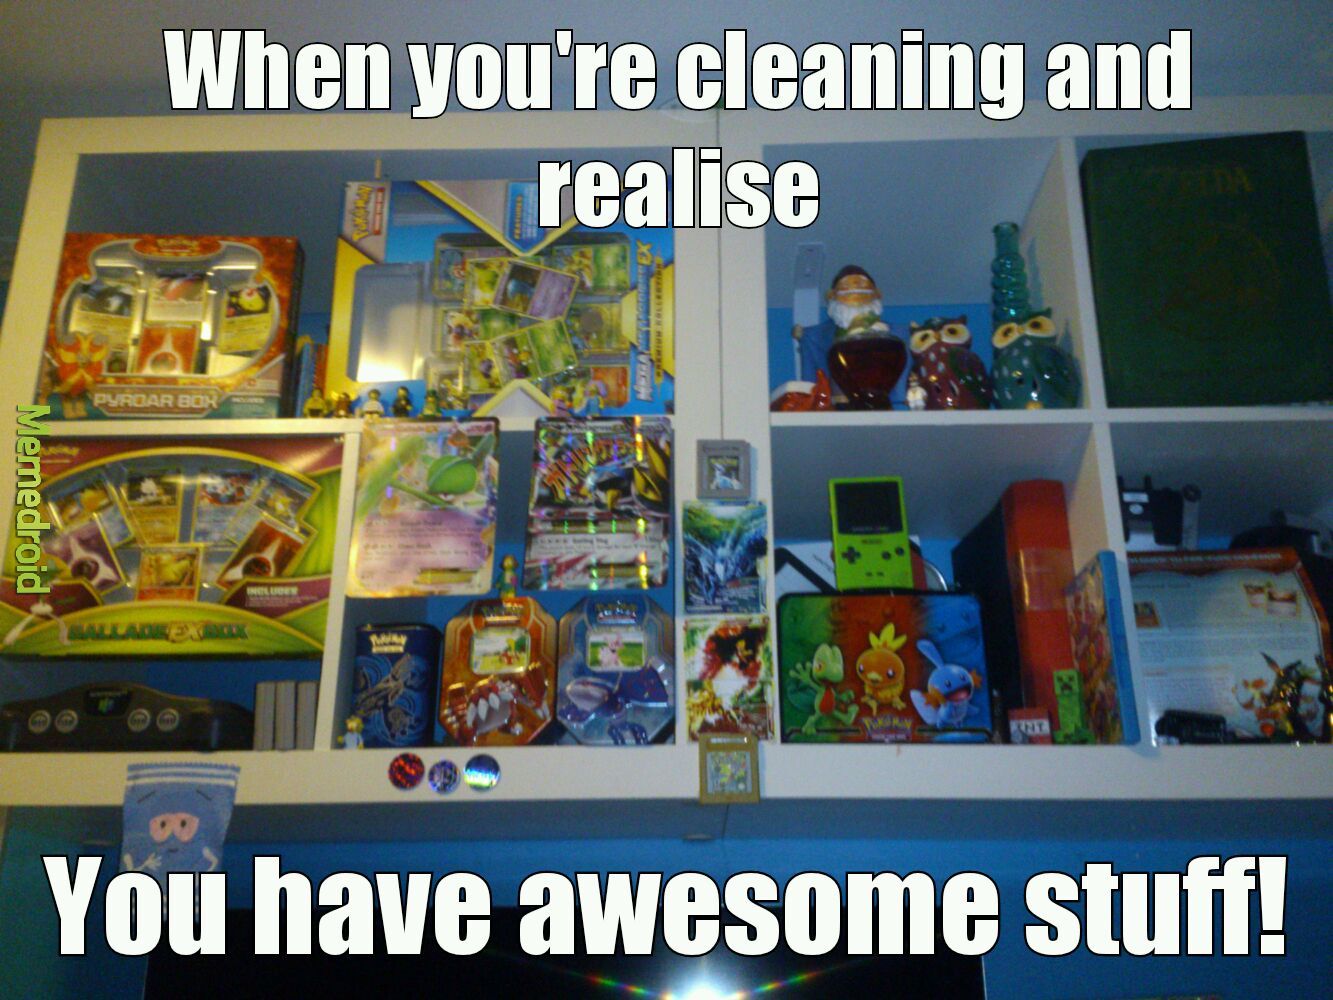 Just cleaned today - meme